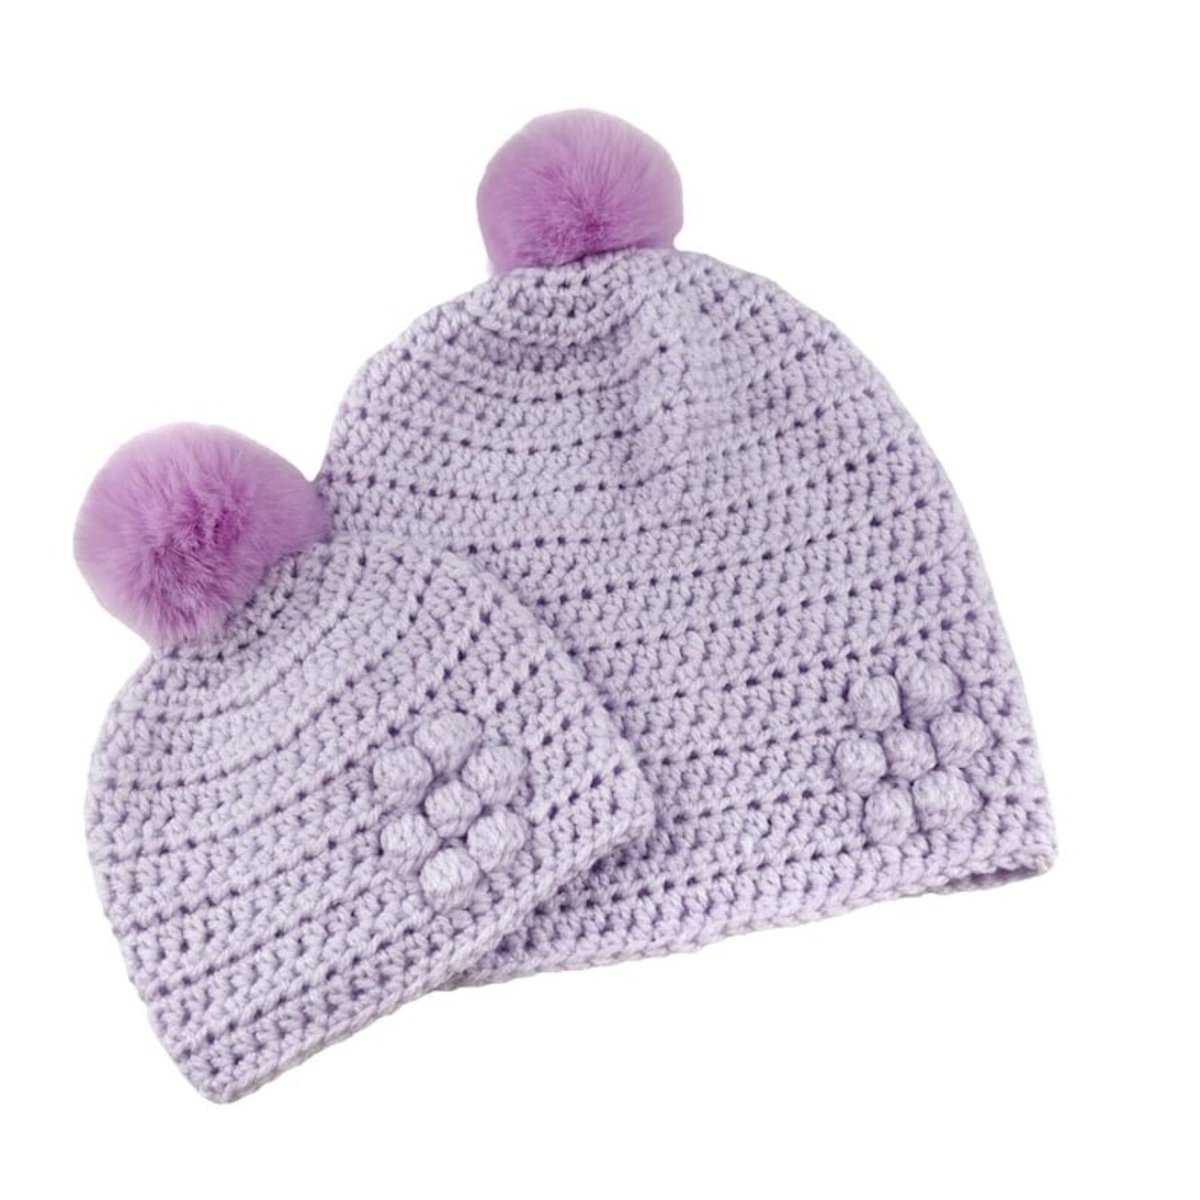 Adorn your day with these matching mummy and baby lilac crocheted hats. Featuring flower detail and detachable faux fur pompoms. Lovingly crafted by #Knittingtopia. Grab yours on #Etsy! #handmade #mummyandbaby #craftbizparty #MHHSBD knittingtopia.etsy.com/listing/167117…